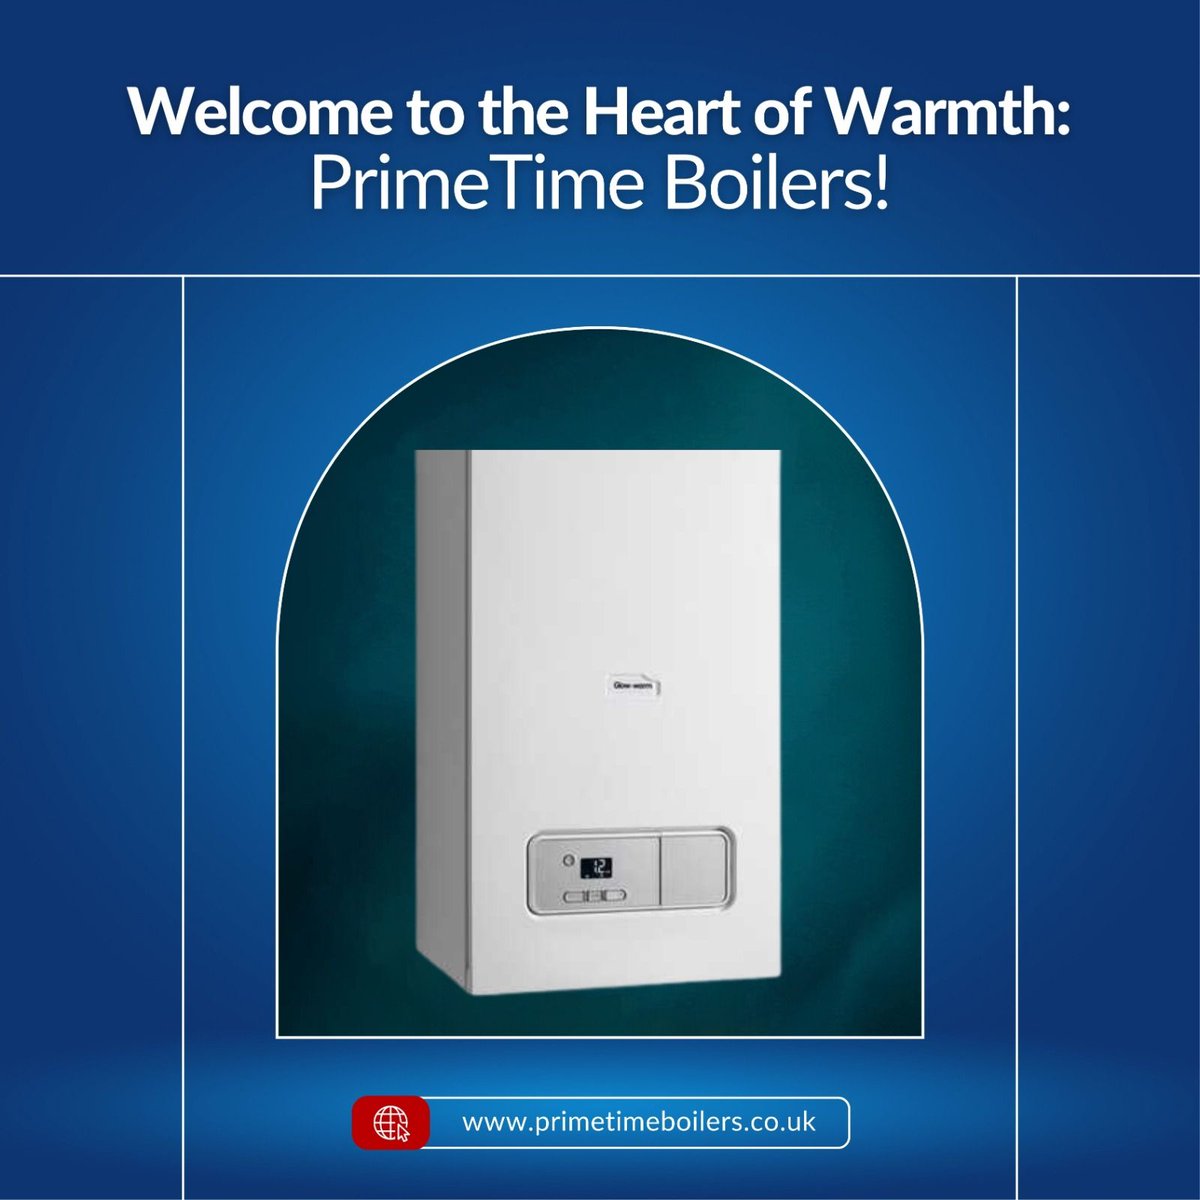 Say hello to cozy nights and toasty mornings with PrimeTime Boilers! 🔥 Our state-of-the-art heating systems ensure that your home stays warm and comfortable all year round.
.
.
.
.
#PrimeTimeBoilers #HomeComfort #EfficientHeating #ModernLiving #UpgradeYourHome